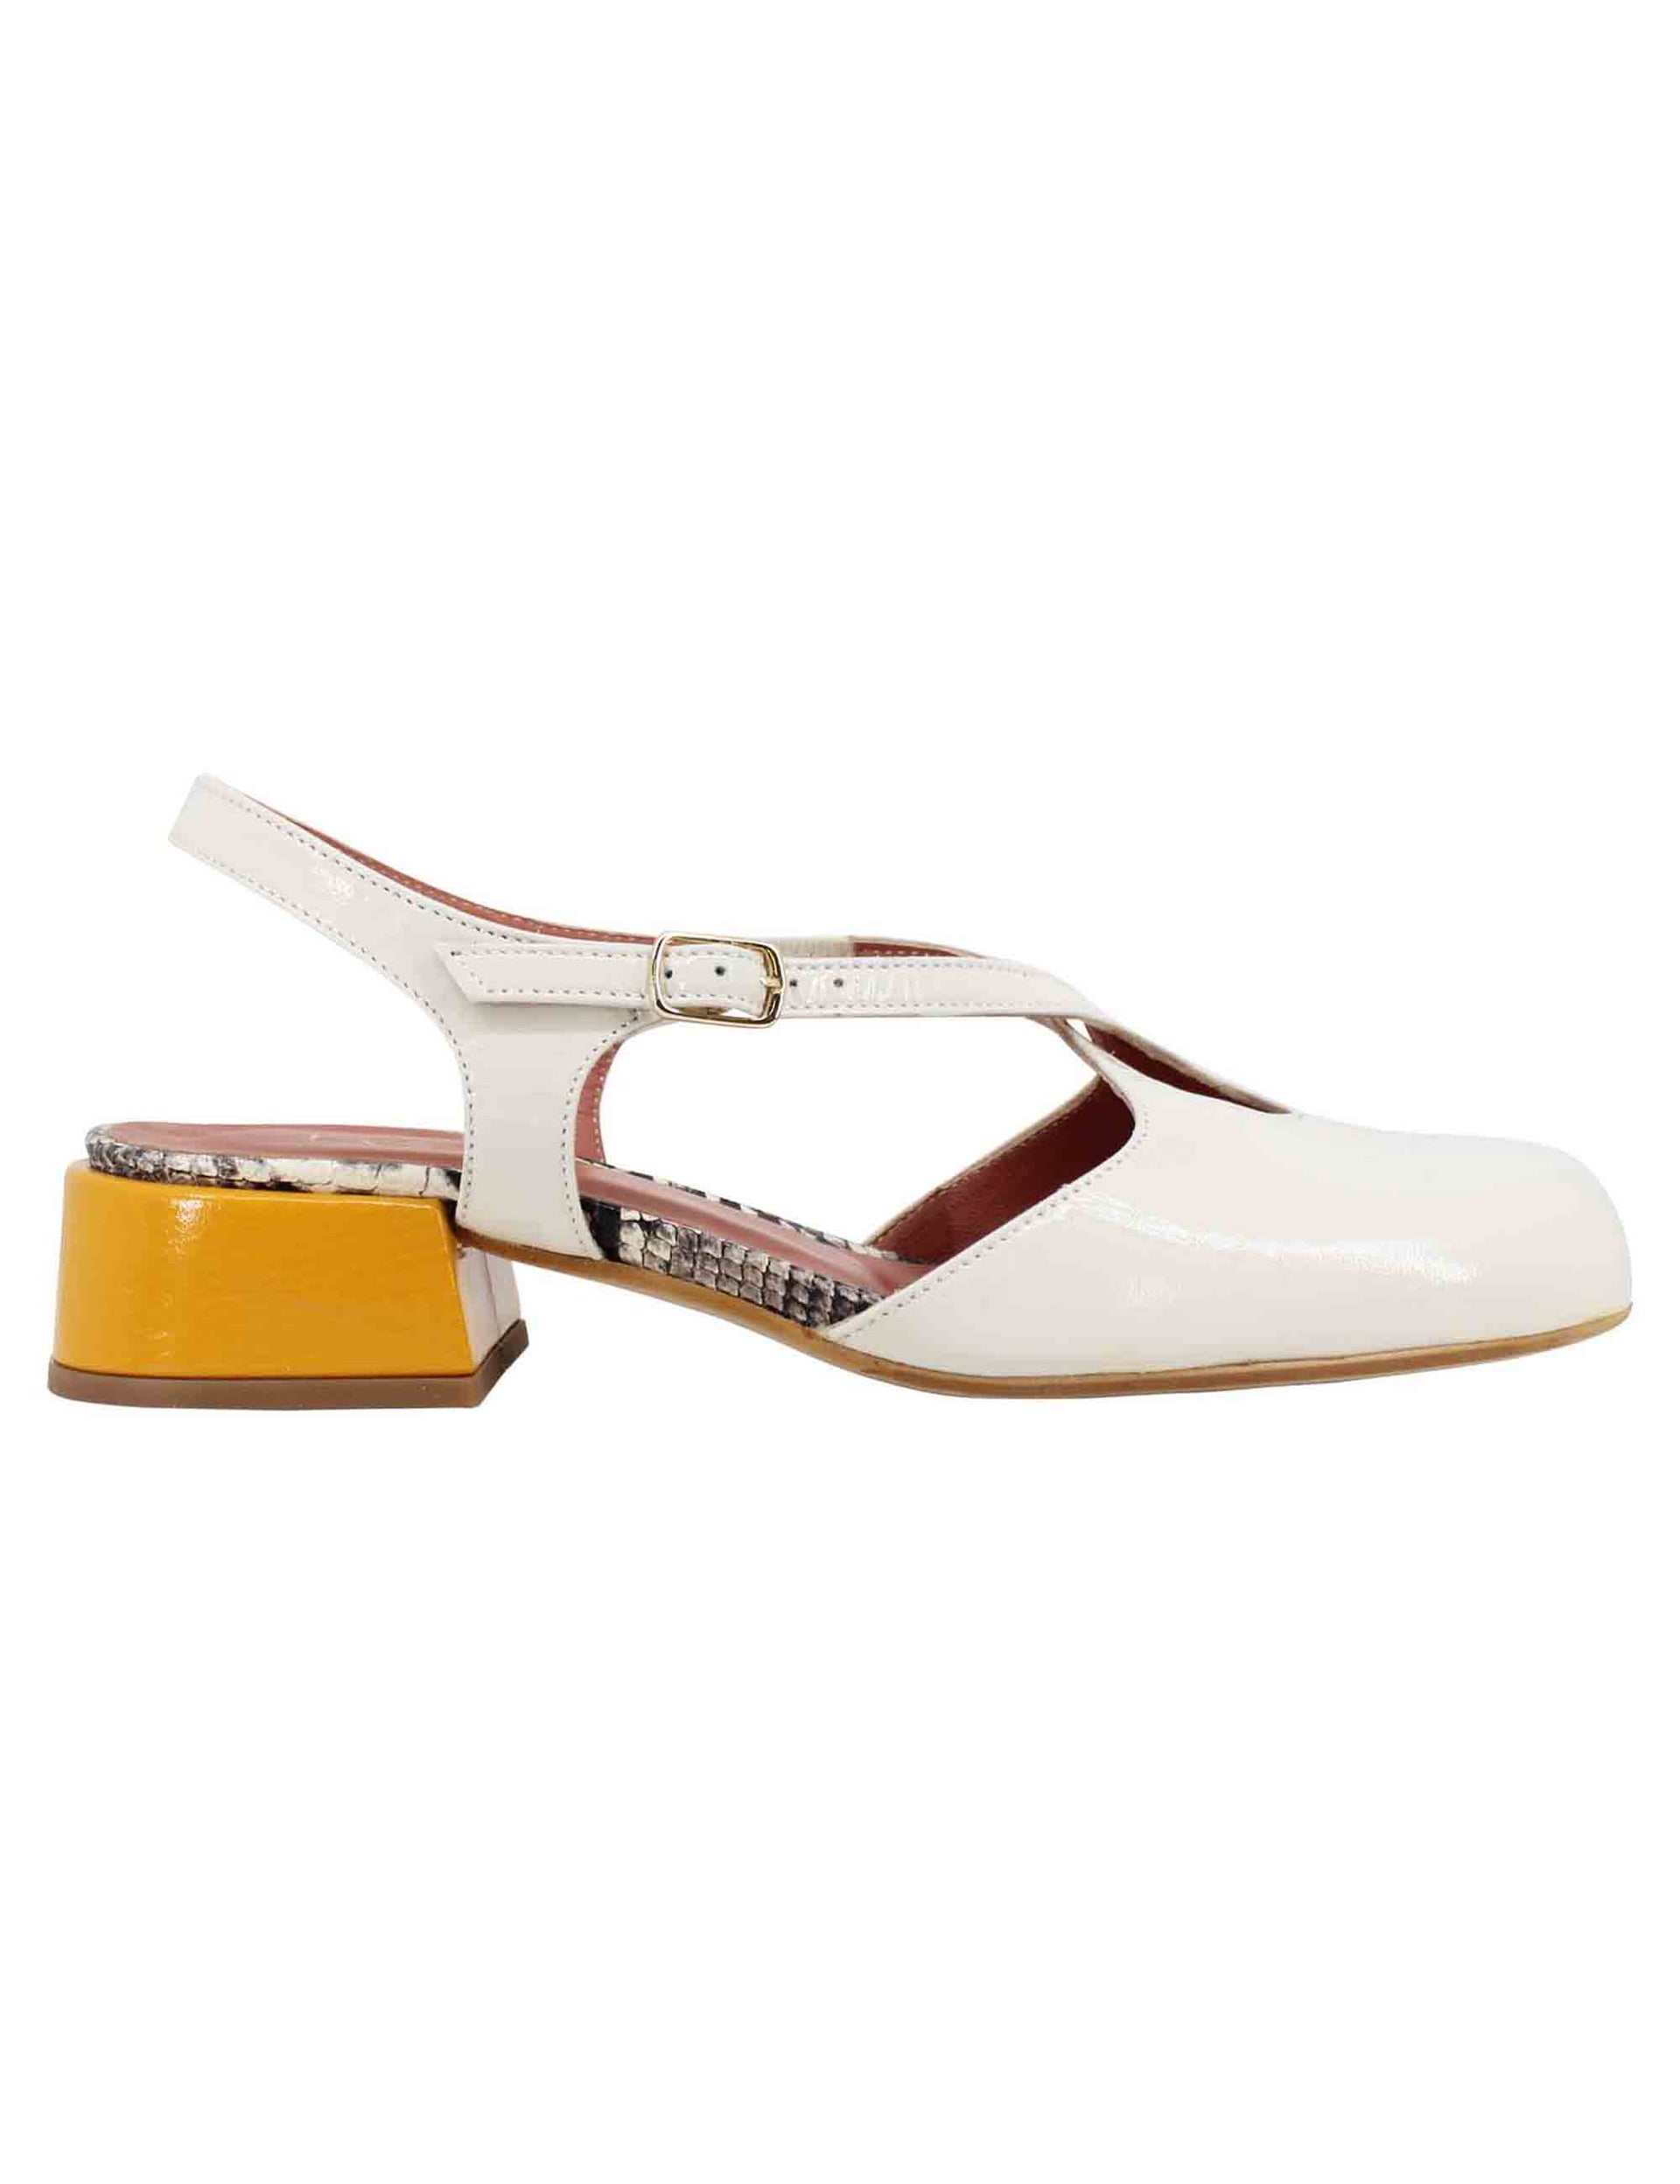 Women's slingback pumps in off-white patent leather with round toe